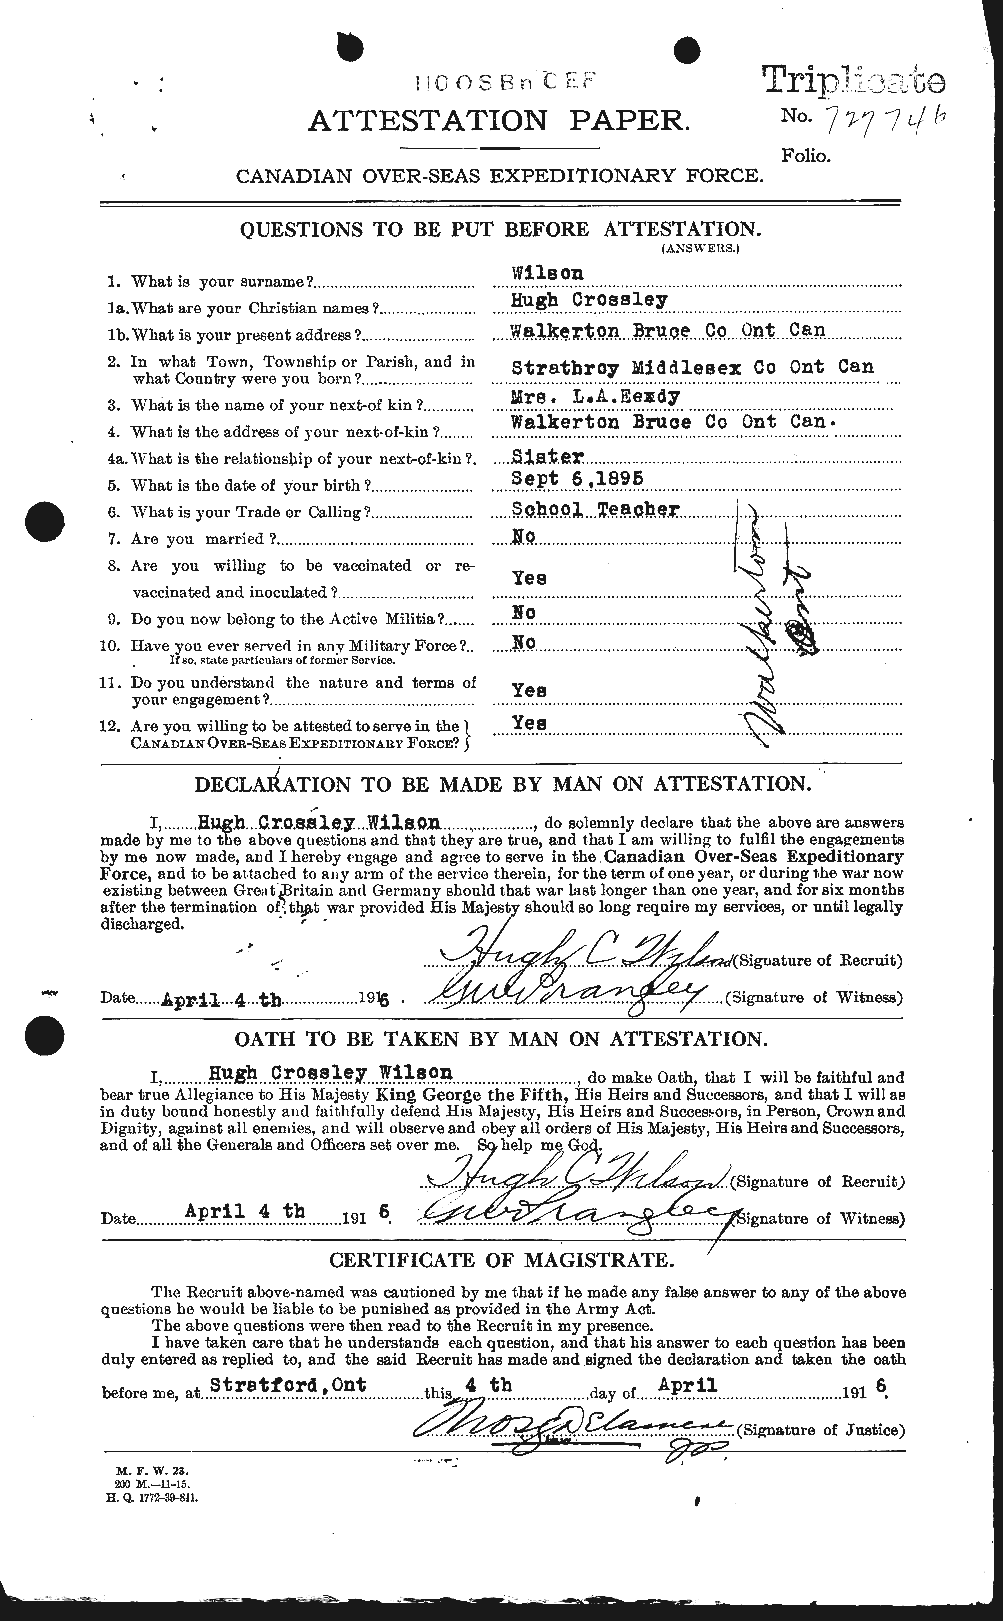 Personnel Records of the First World War - CEF 679614a